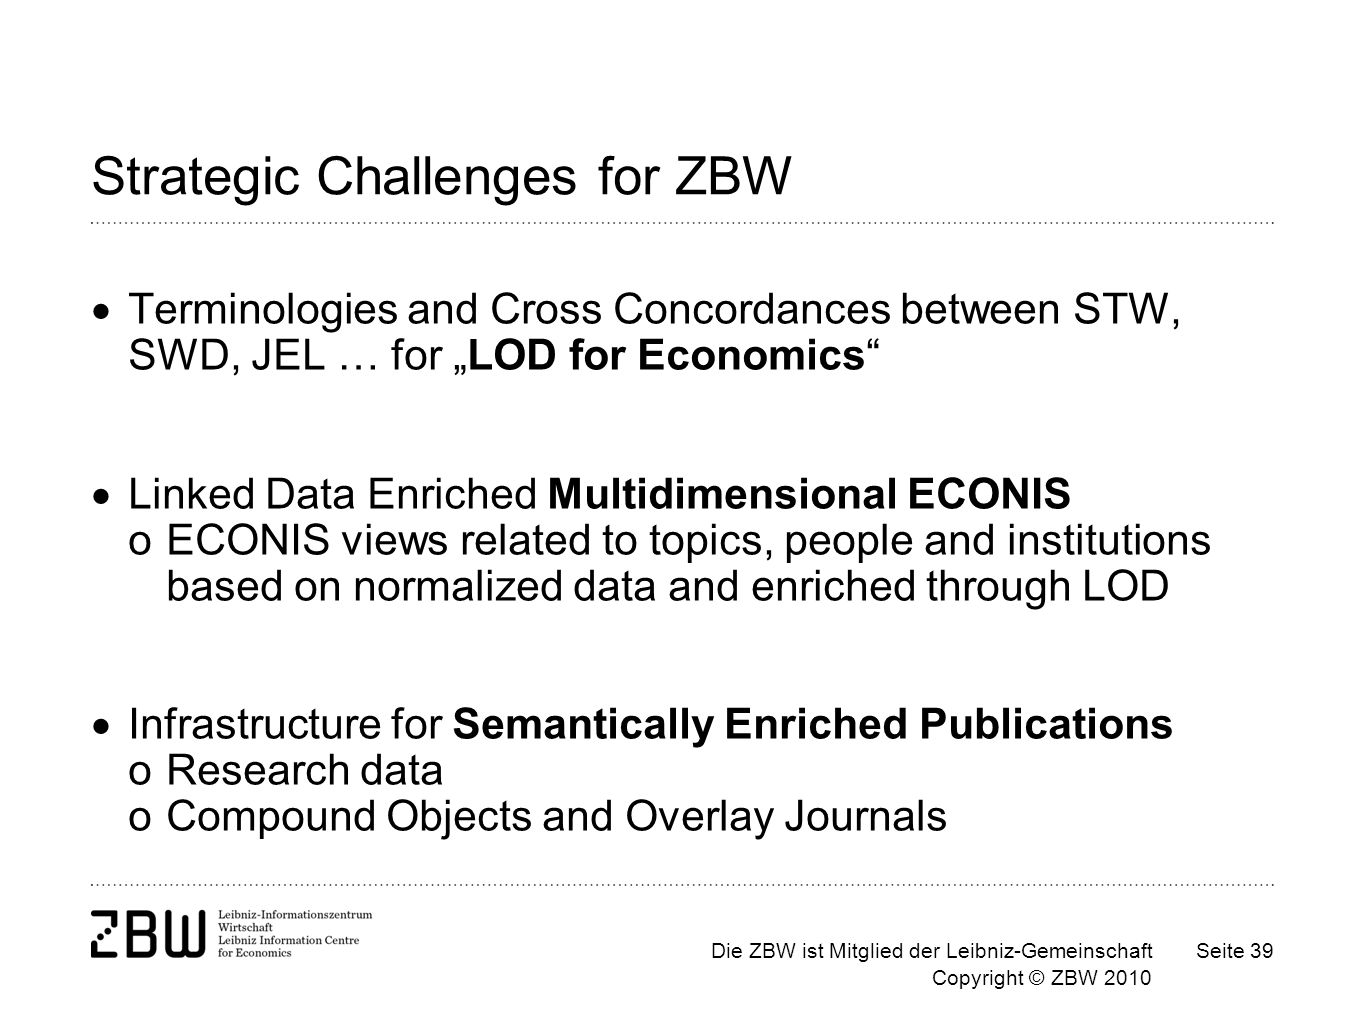 Die ZBW ist Mitglied der Leibniz-Gemeinschaft Copyright © ZBW 2010 Seite 39 Strategic Challenges for ZBW Terminologies and Cross Concordances between STW, SWD, JEL … for LOD for Economics Linked Data Enriched Multidimensional ECONIS oECONIS views related to topics, people and institutions based on normalized data and enriched through LOD Infrastructure for Semantically Enriched Publications oResearch data oCompound Objects and Overlay Journals